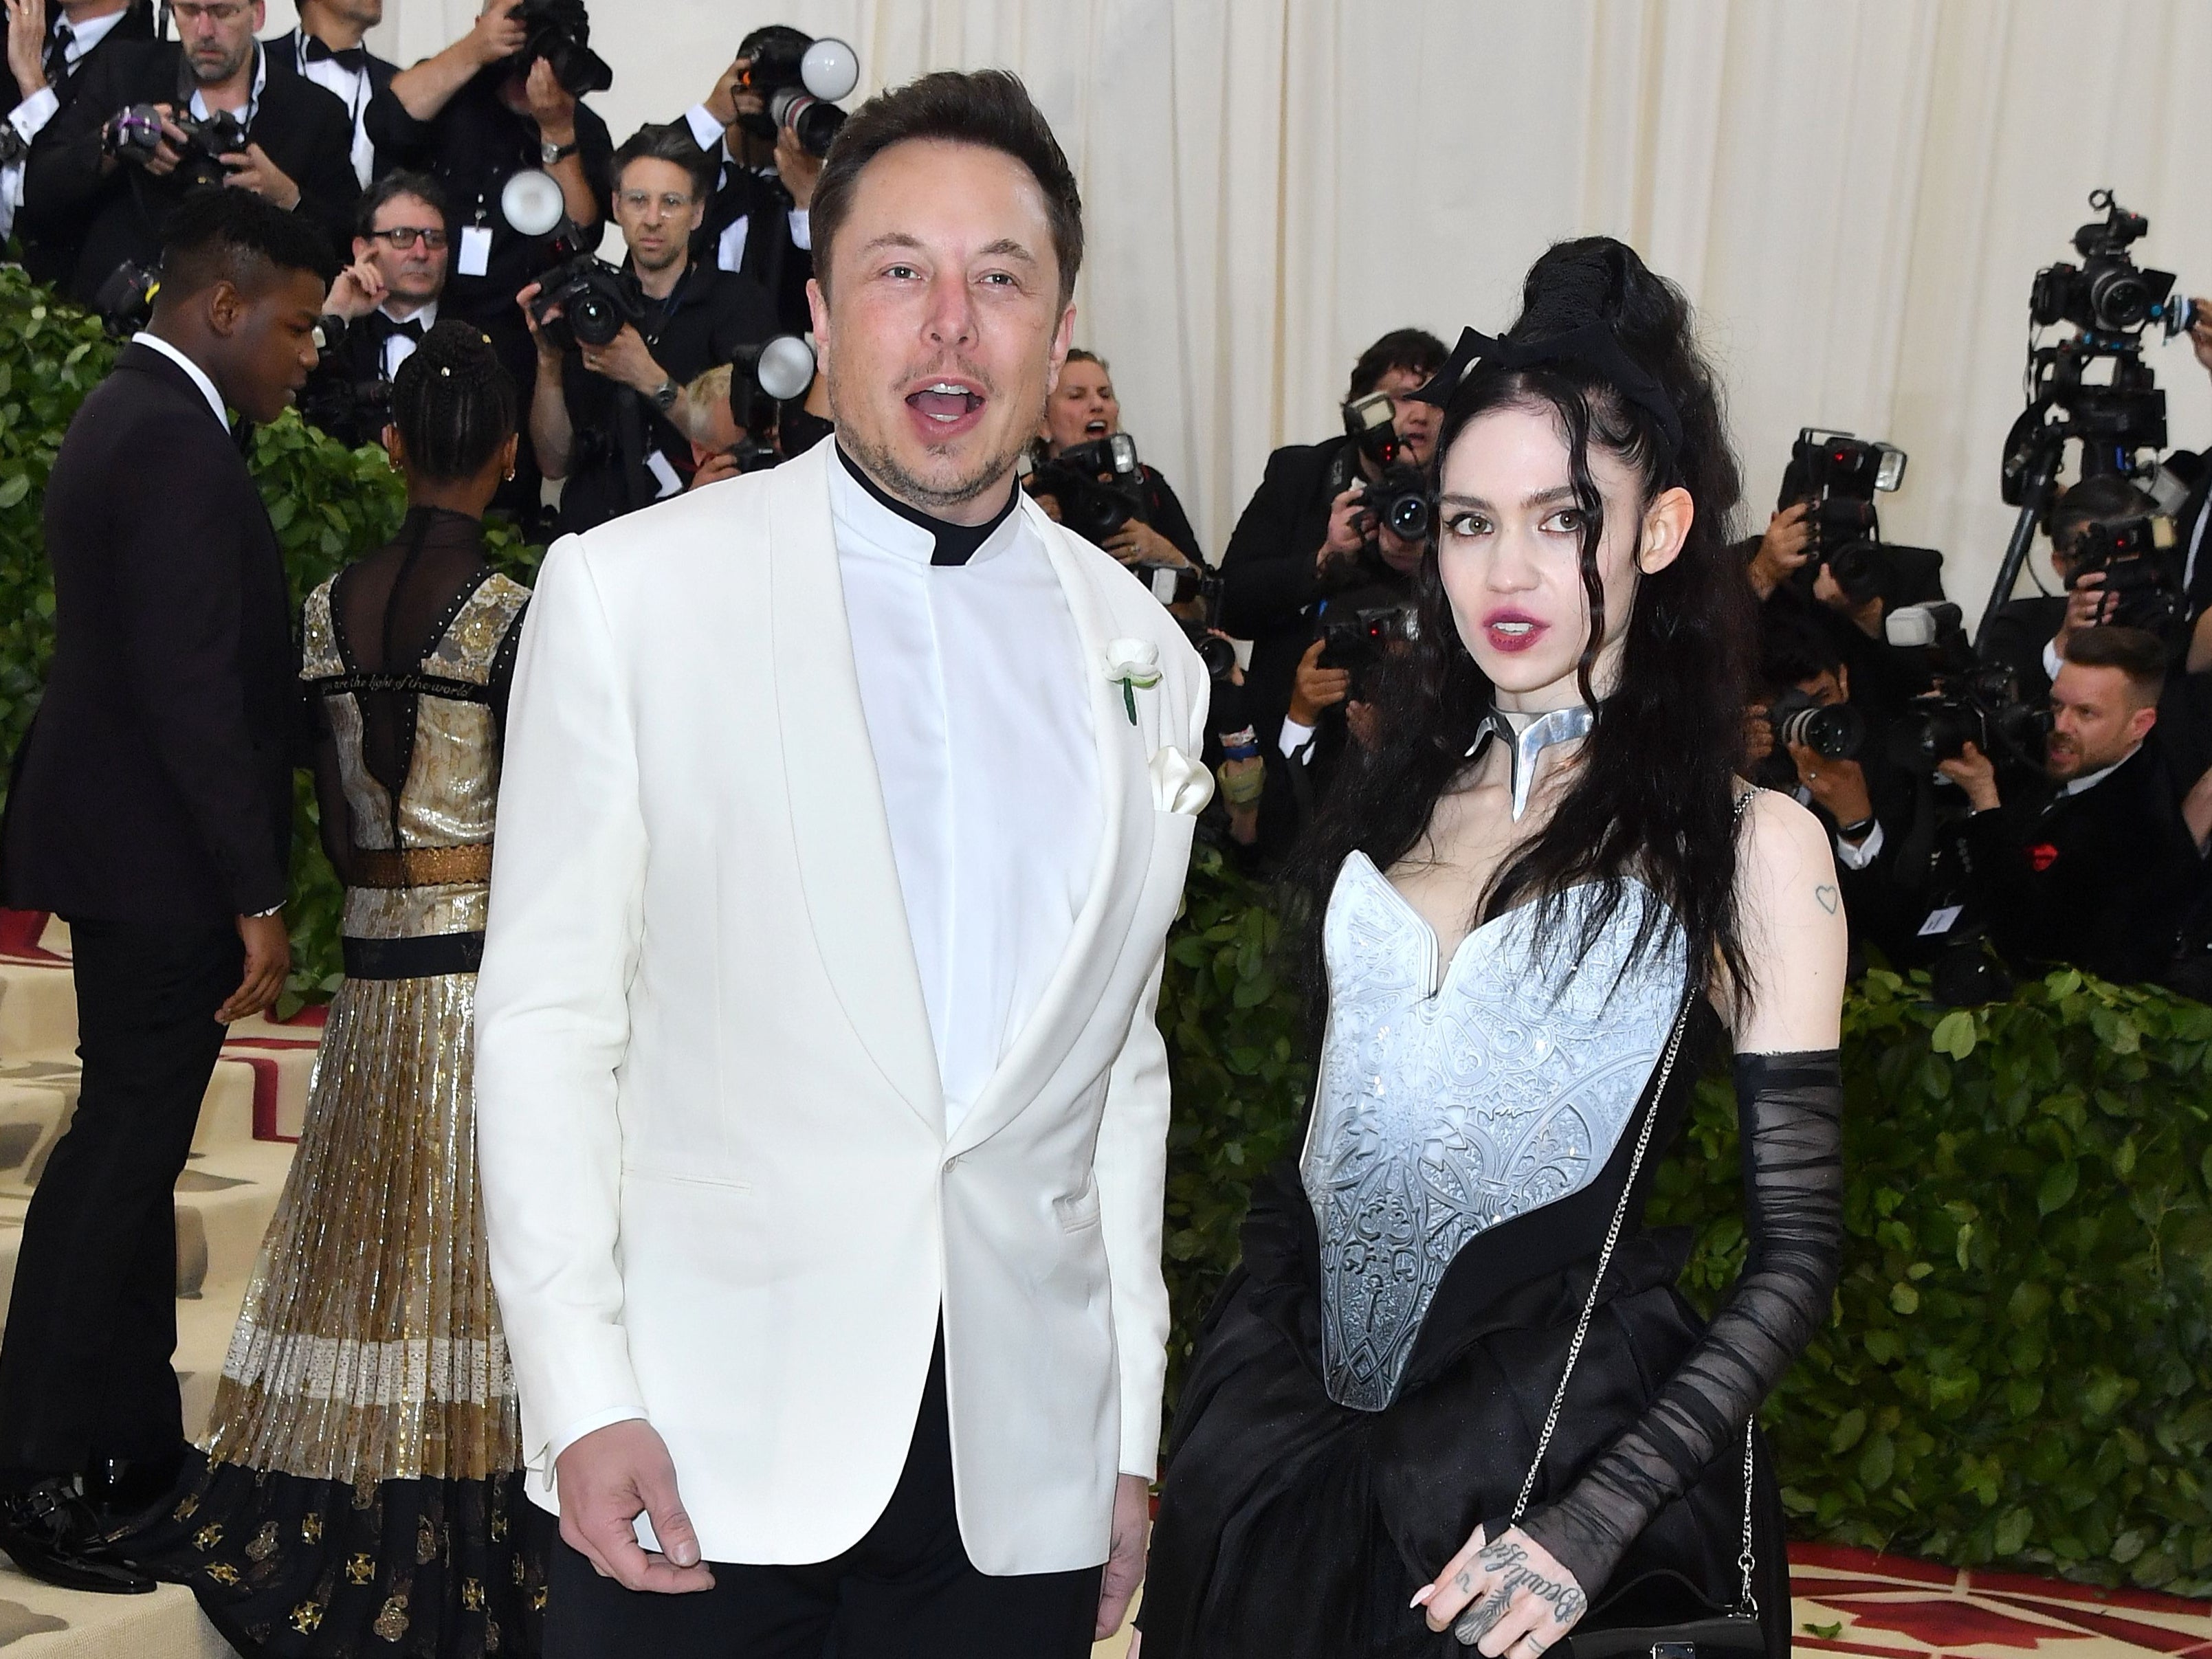 What is the meaning behind Grimes and Elon Musk’s new unusual baby name?